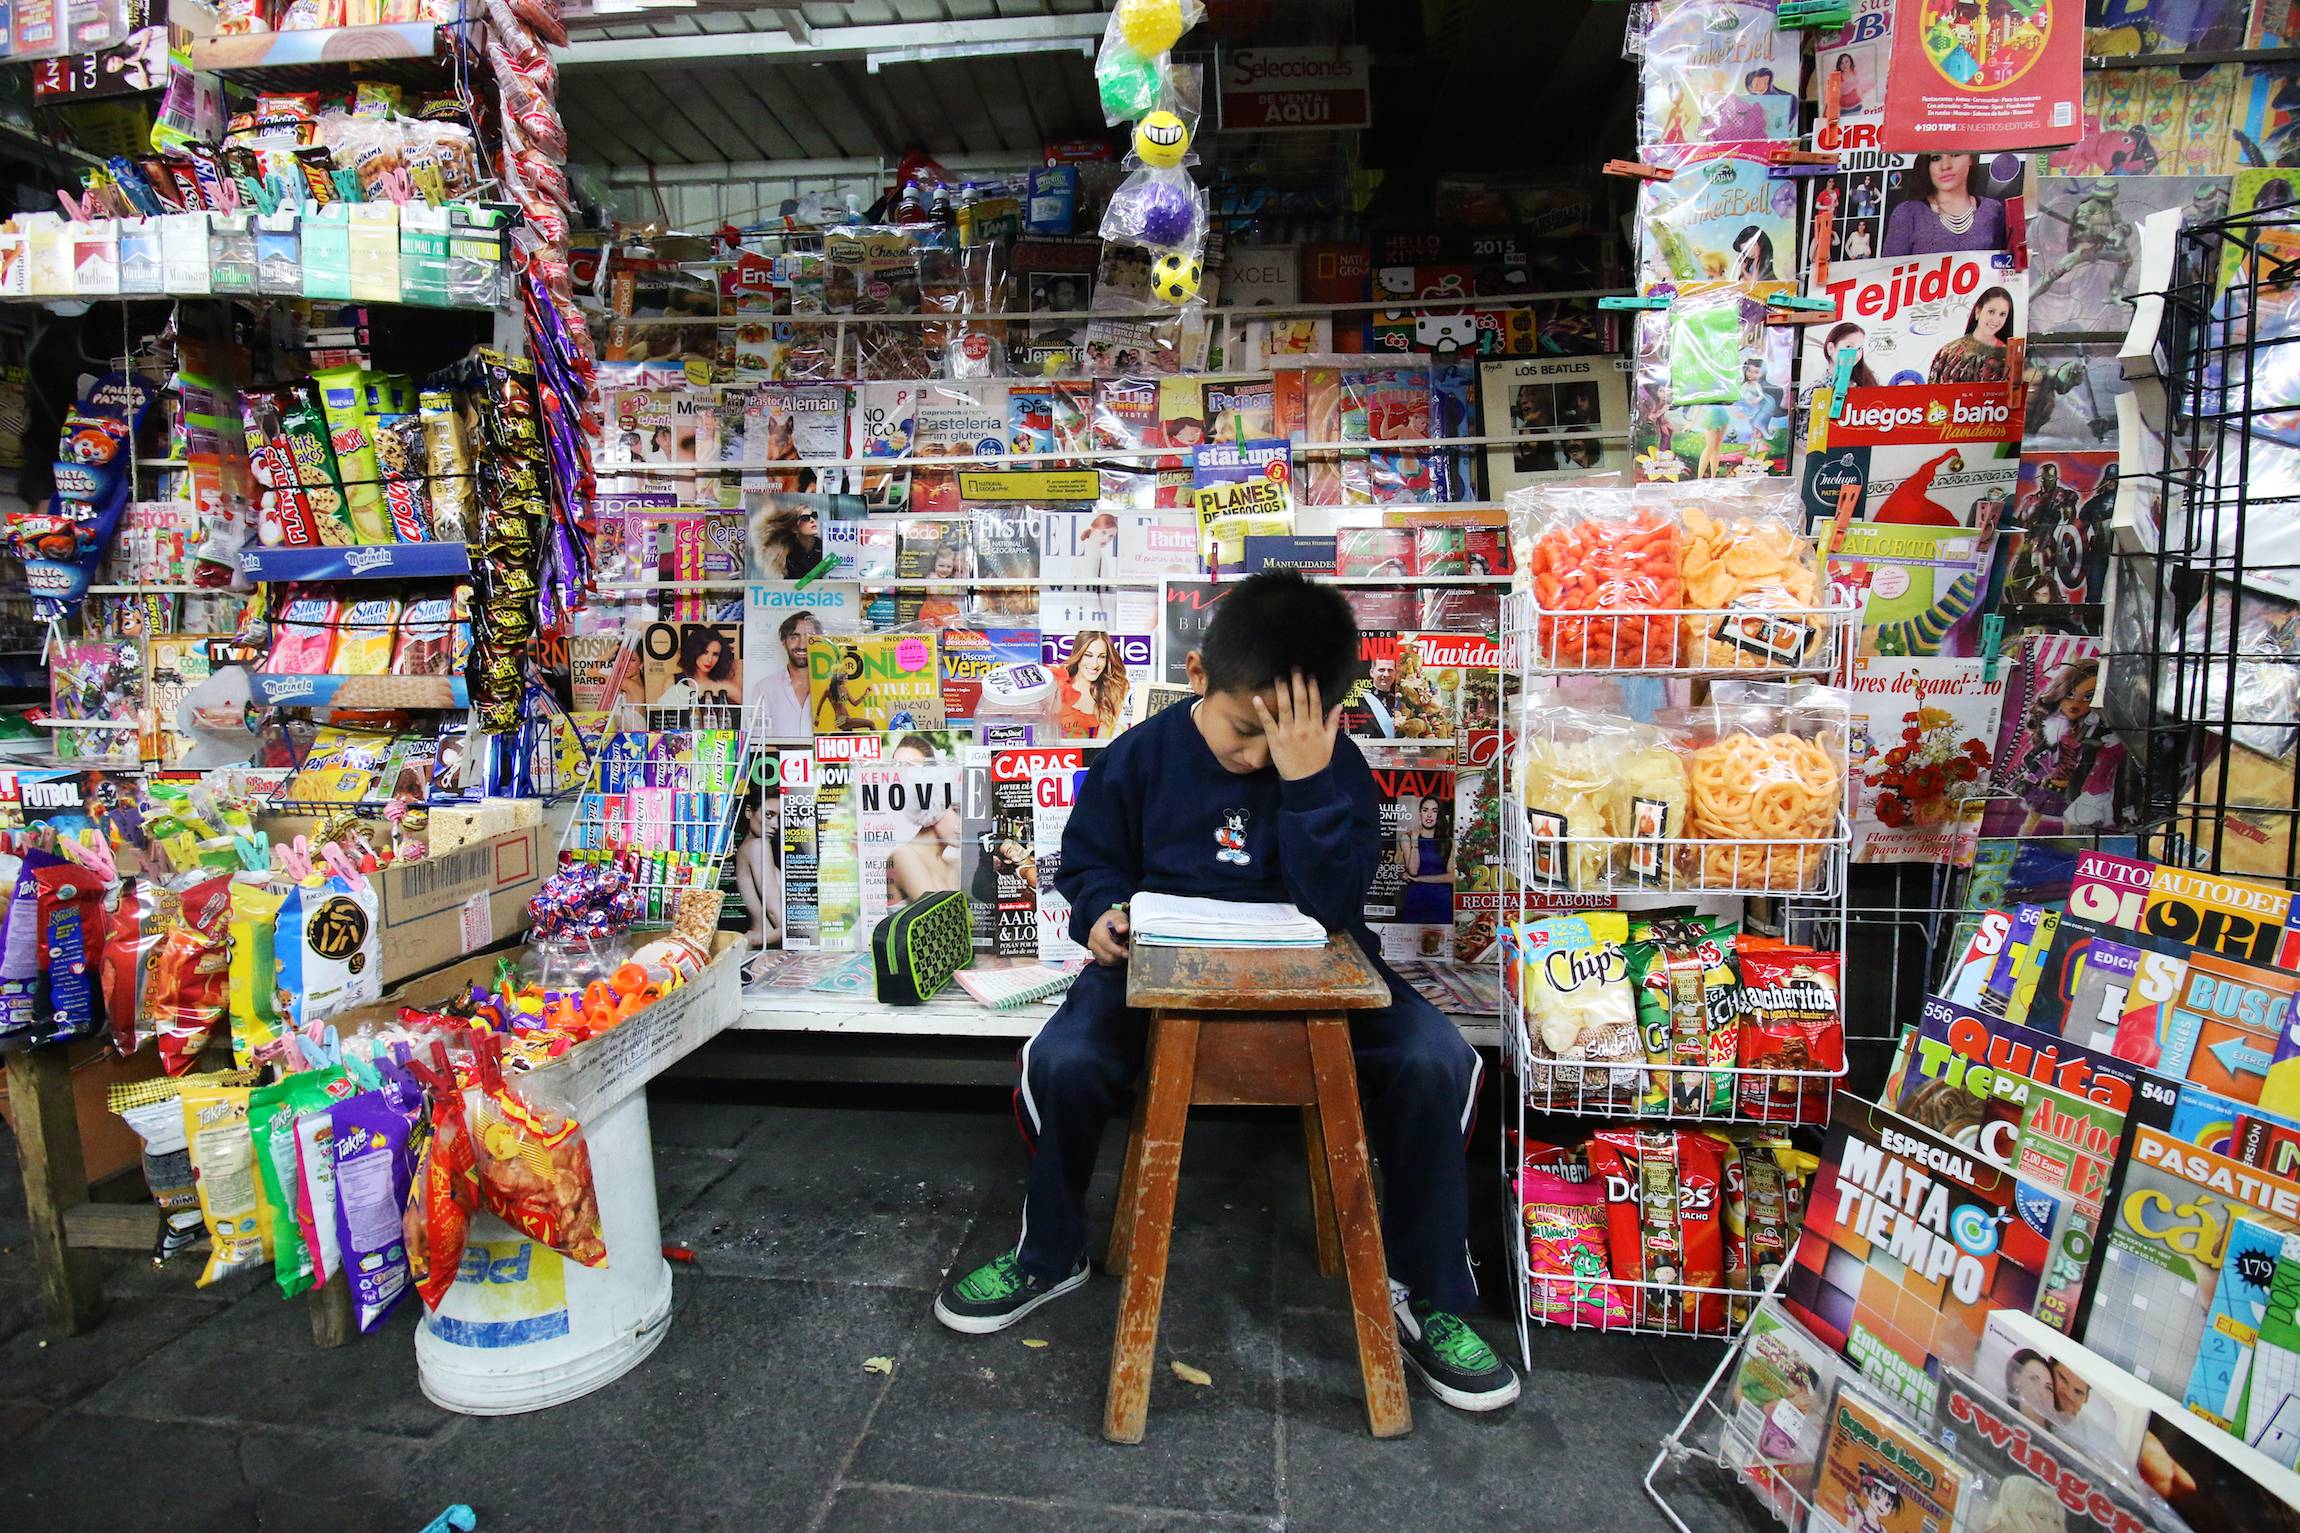 A boy studies, sitting in a kiosk in the streets of Mexico City, D.F., Friday, Nov. 21, 2014.